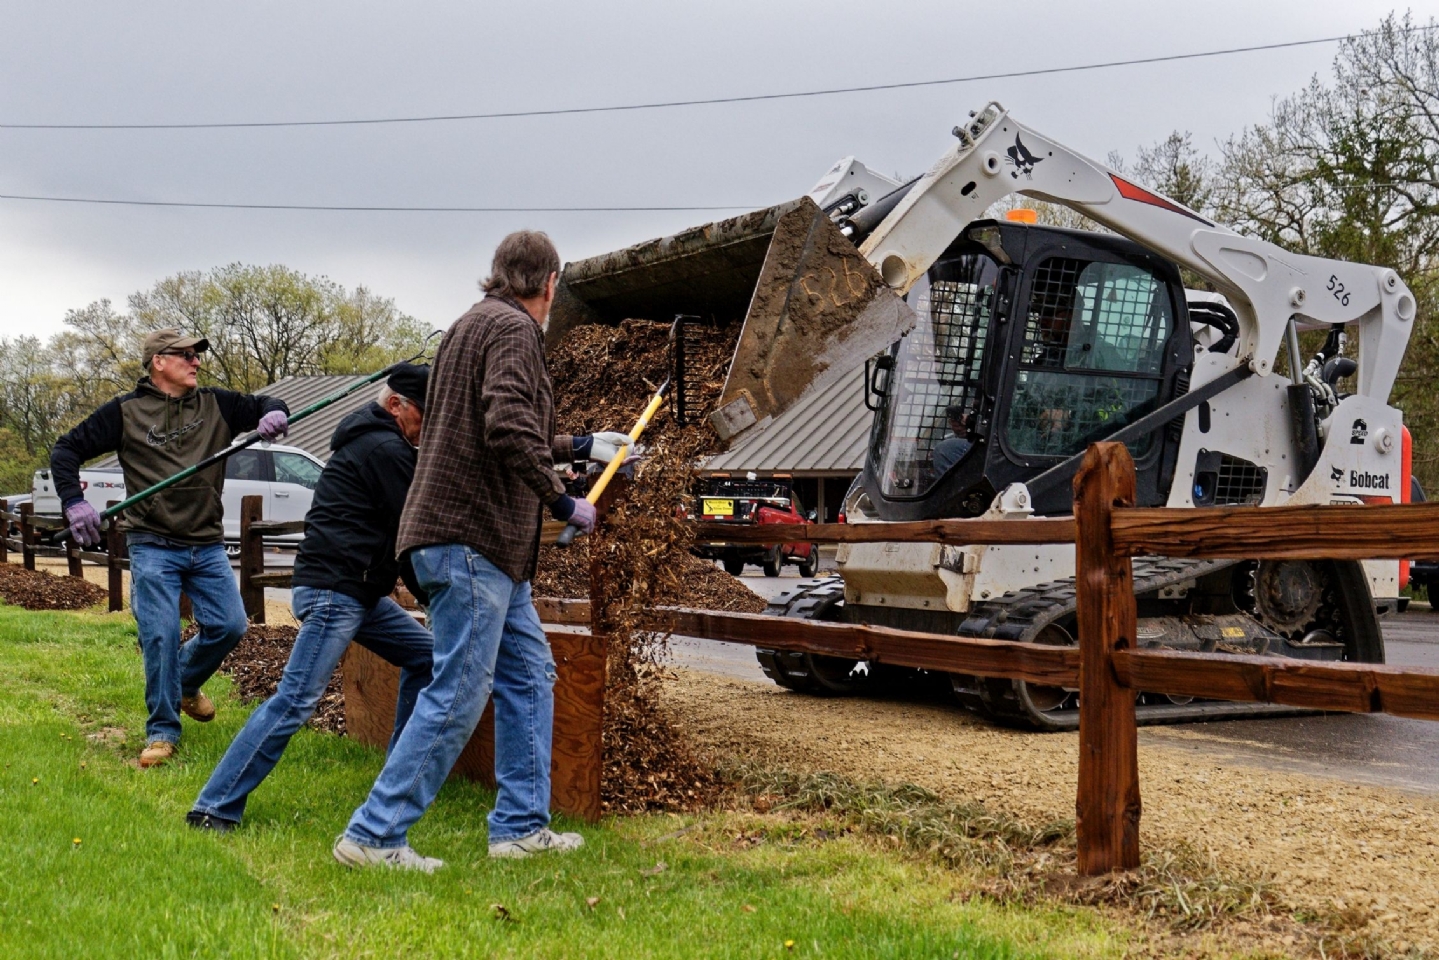 Precision Mulch Delivery.
Rock River Heritage Park (formerly Camp Indian Trails).